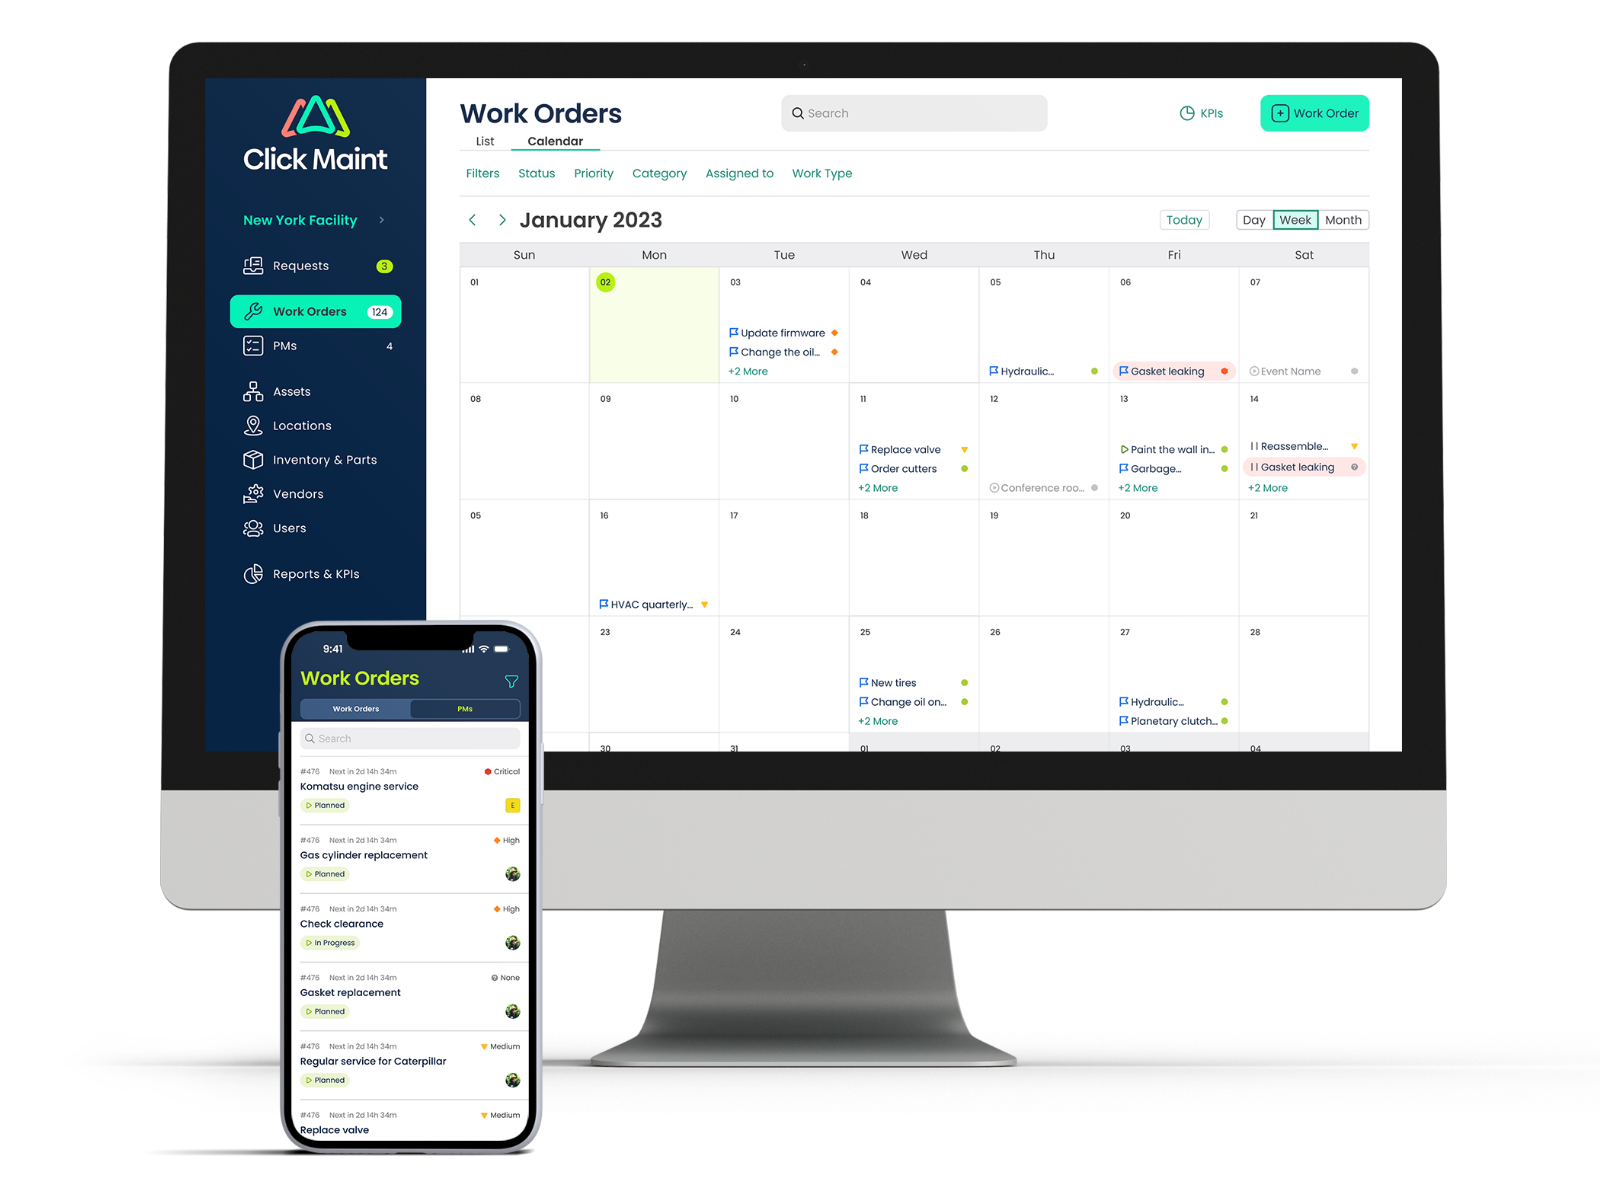 Interactive Calendar  - Users can view and manage all work orders from an easy to use calendar interface. Users can view work orders through the month or for the week.  Use the filtering to drill down.  Reschedule work using the  "Click and Drag" feature.